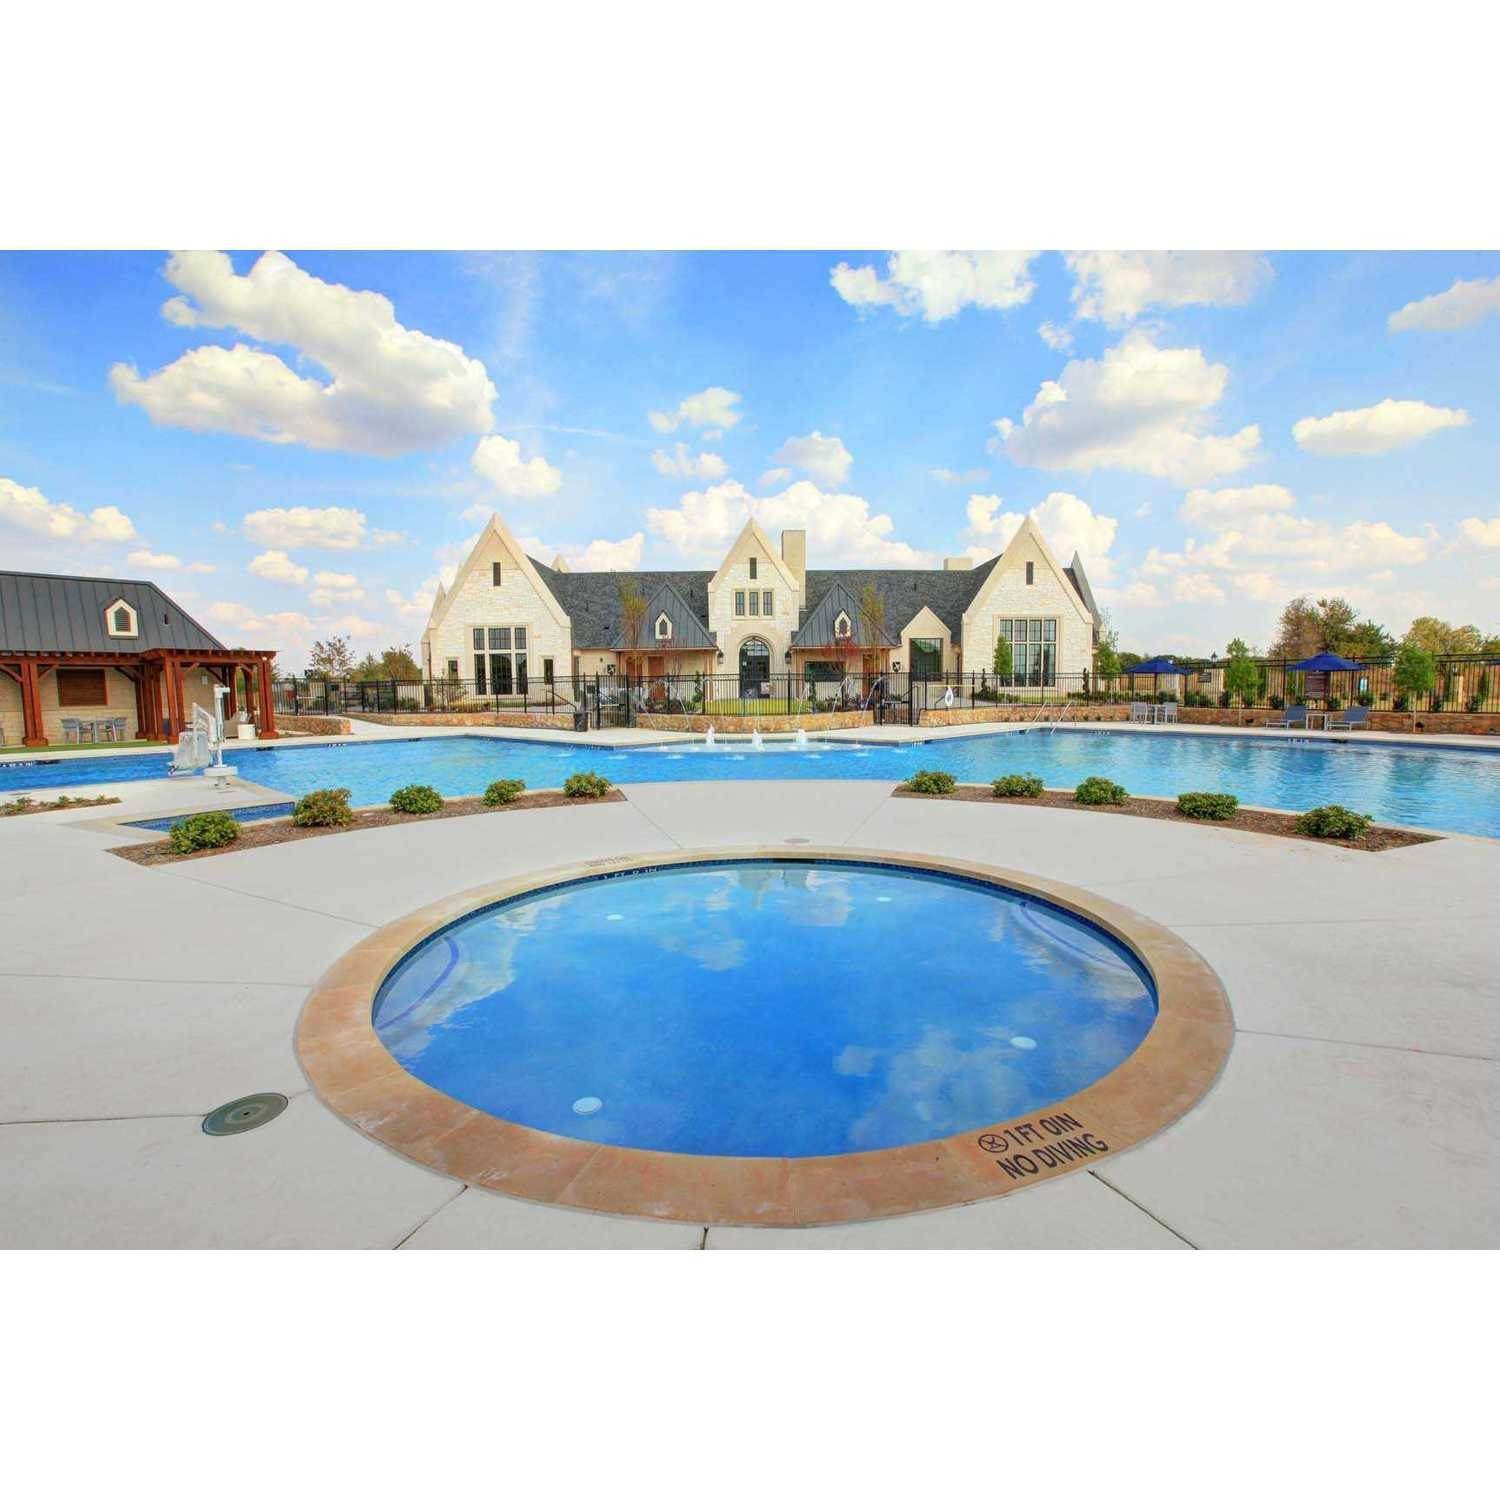 16. Cambridge Crossing 40ft. lots xây dựng tại 2237 Pinner Court, Frisco, TX 75035